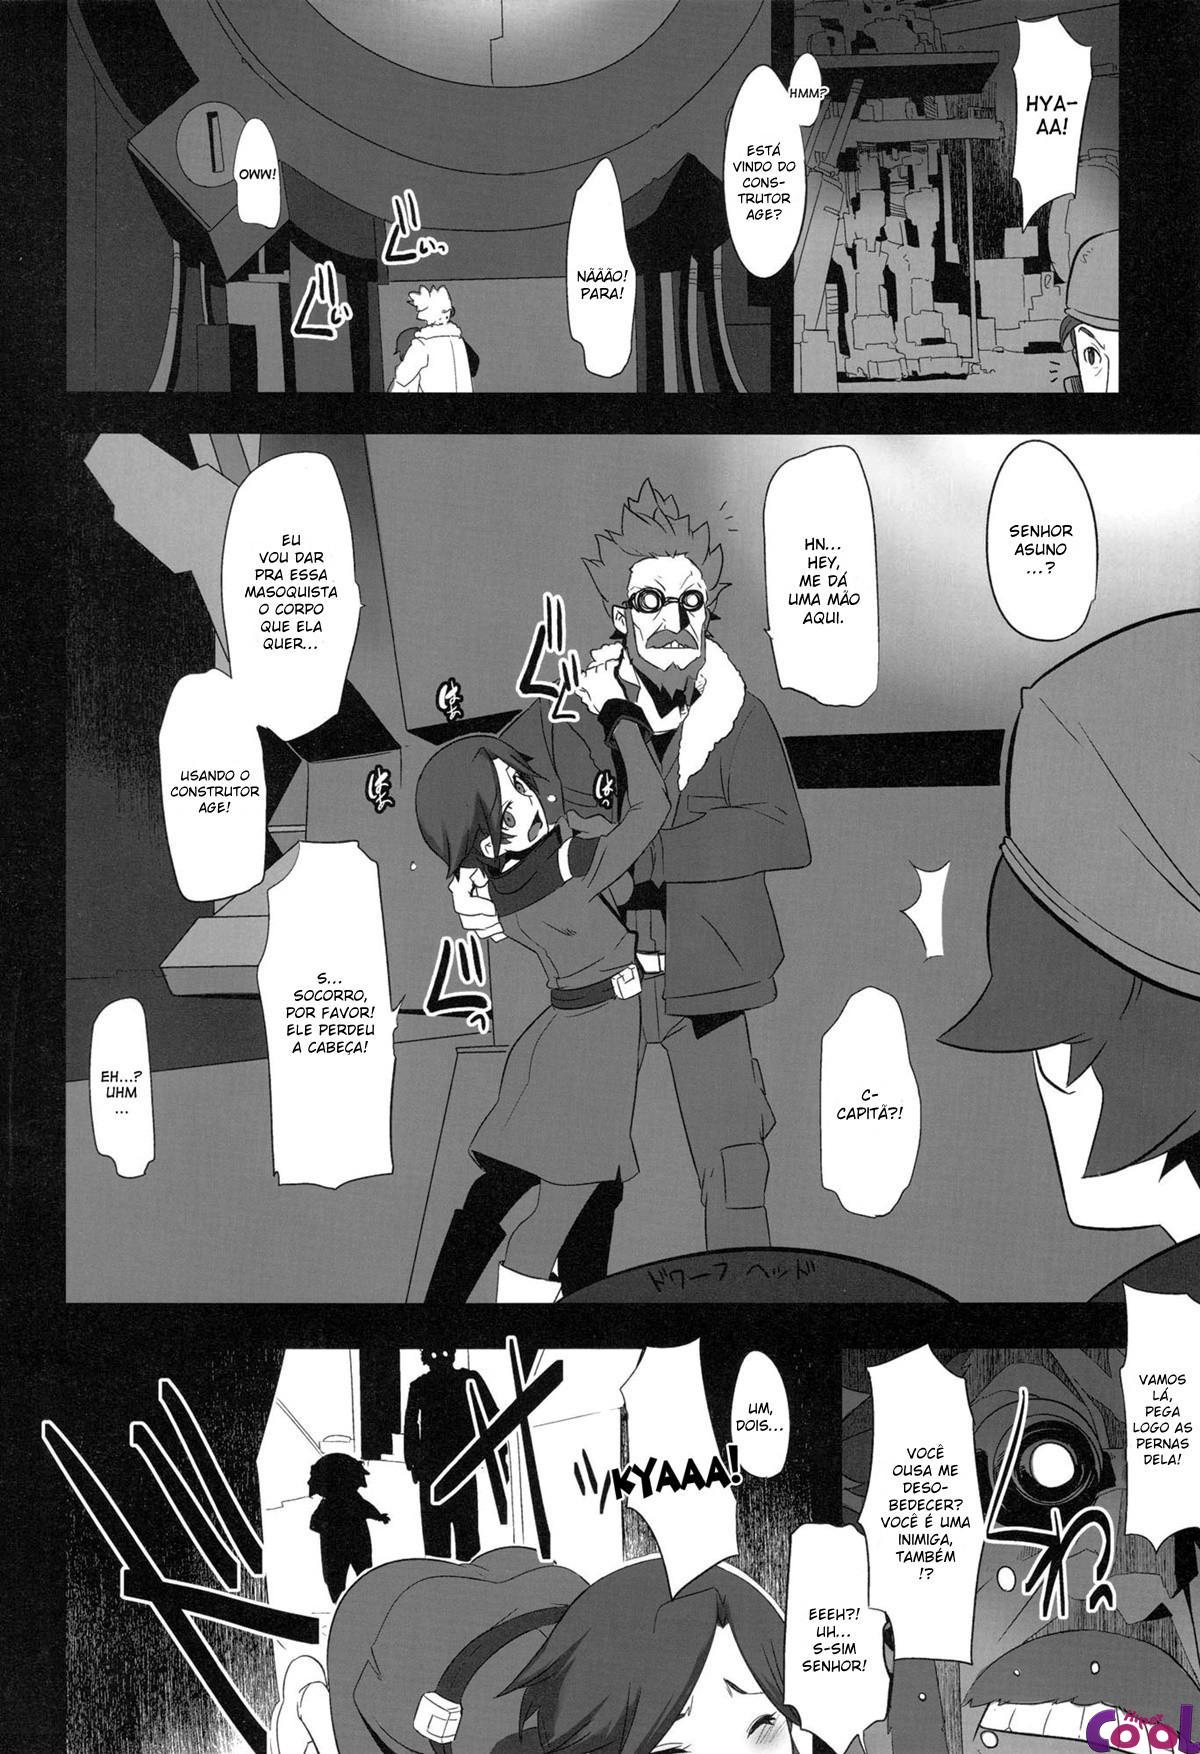 dame-kanchou-or-useless-captain-chapter-01-page-19.jpg